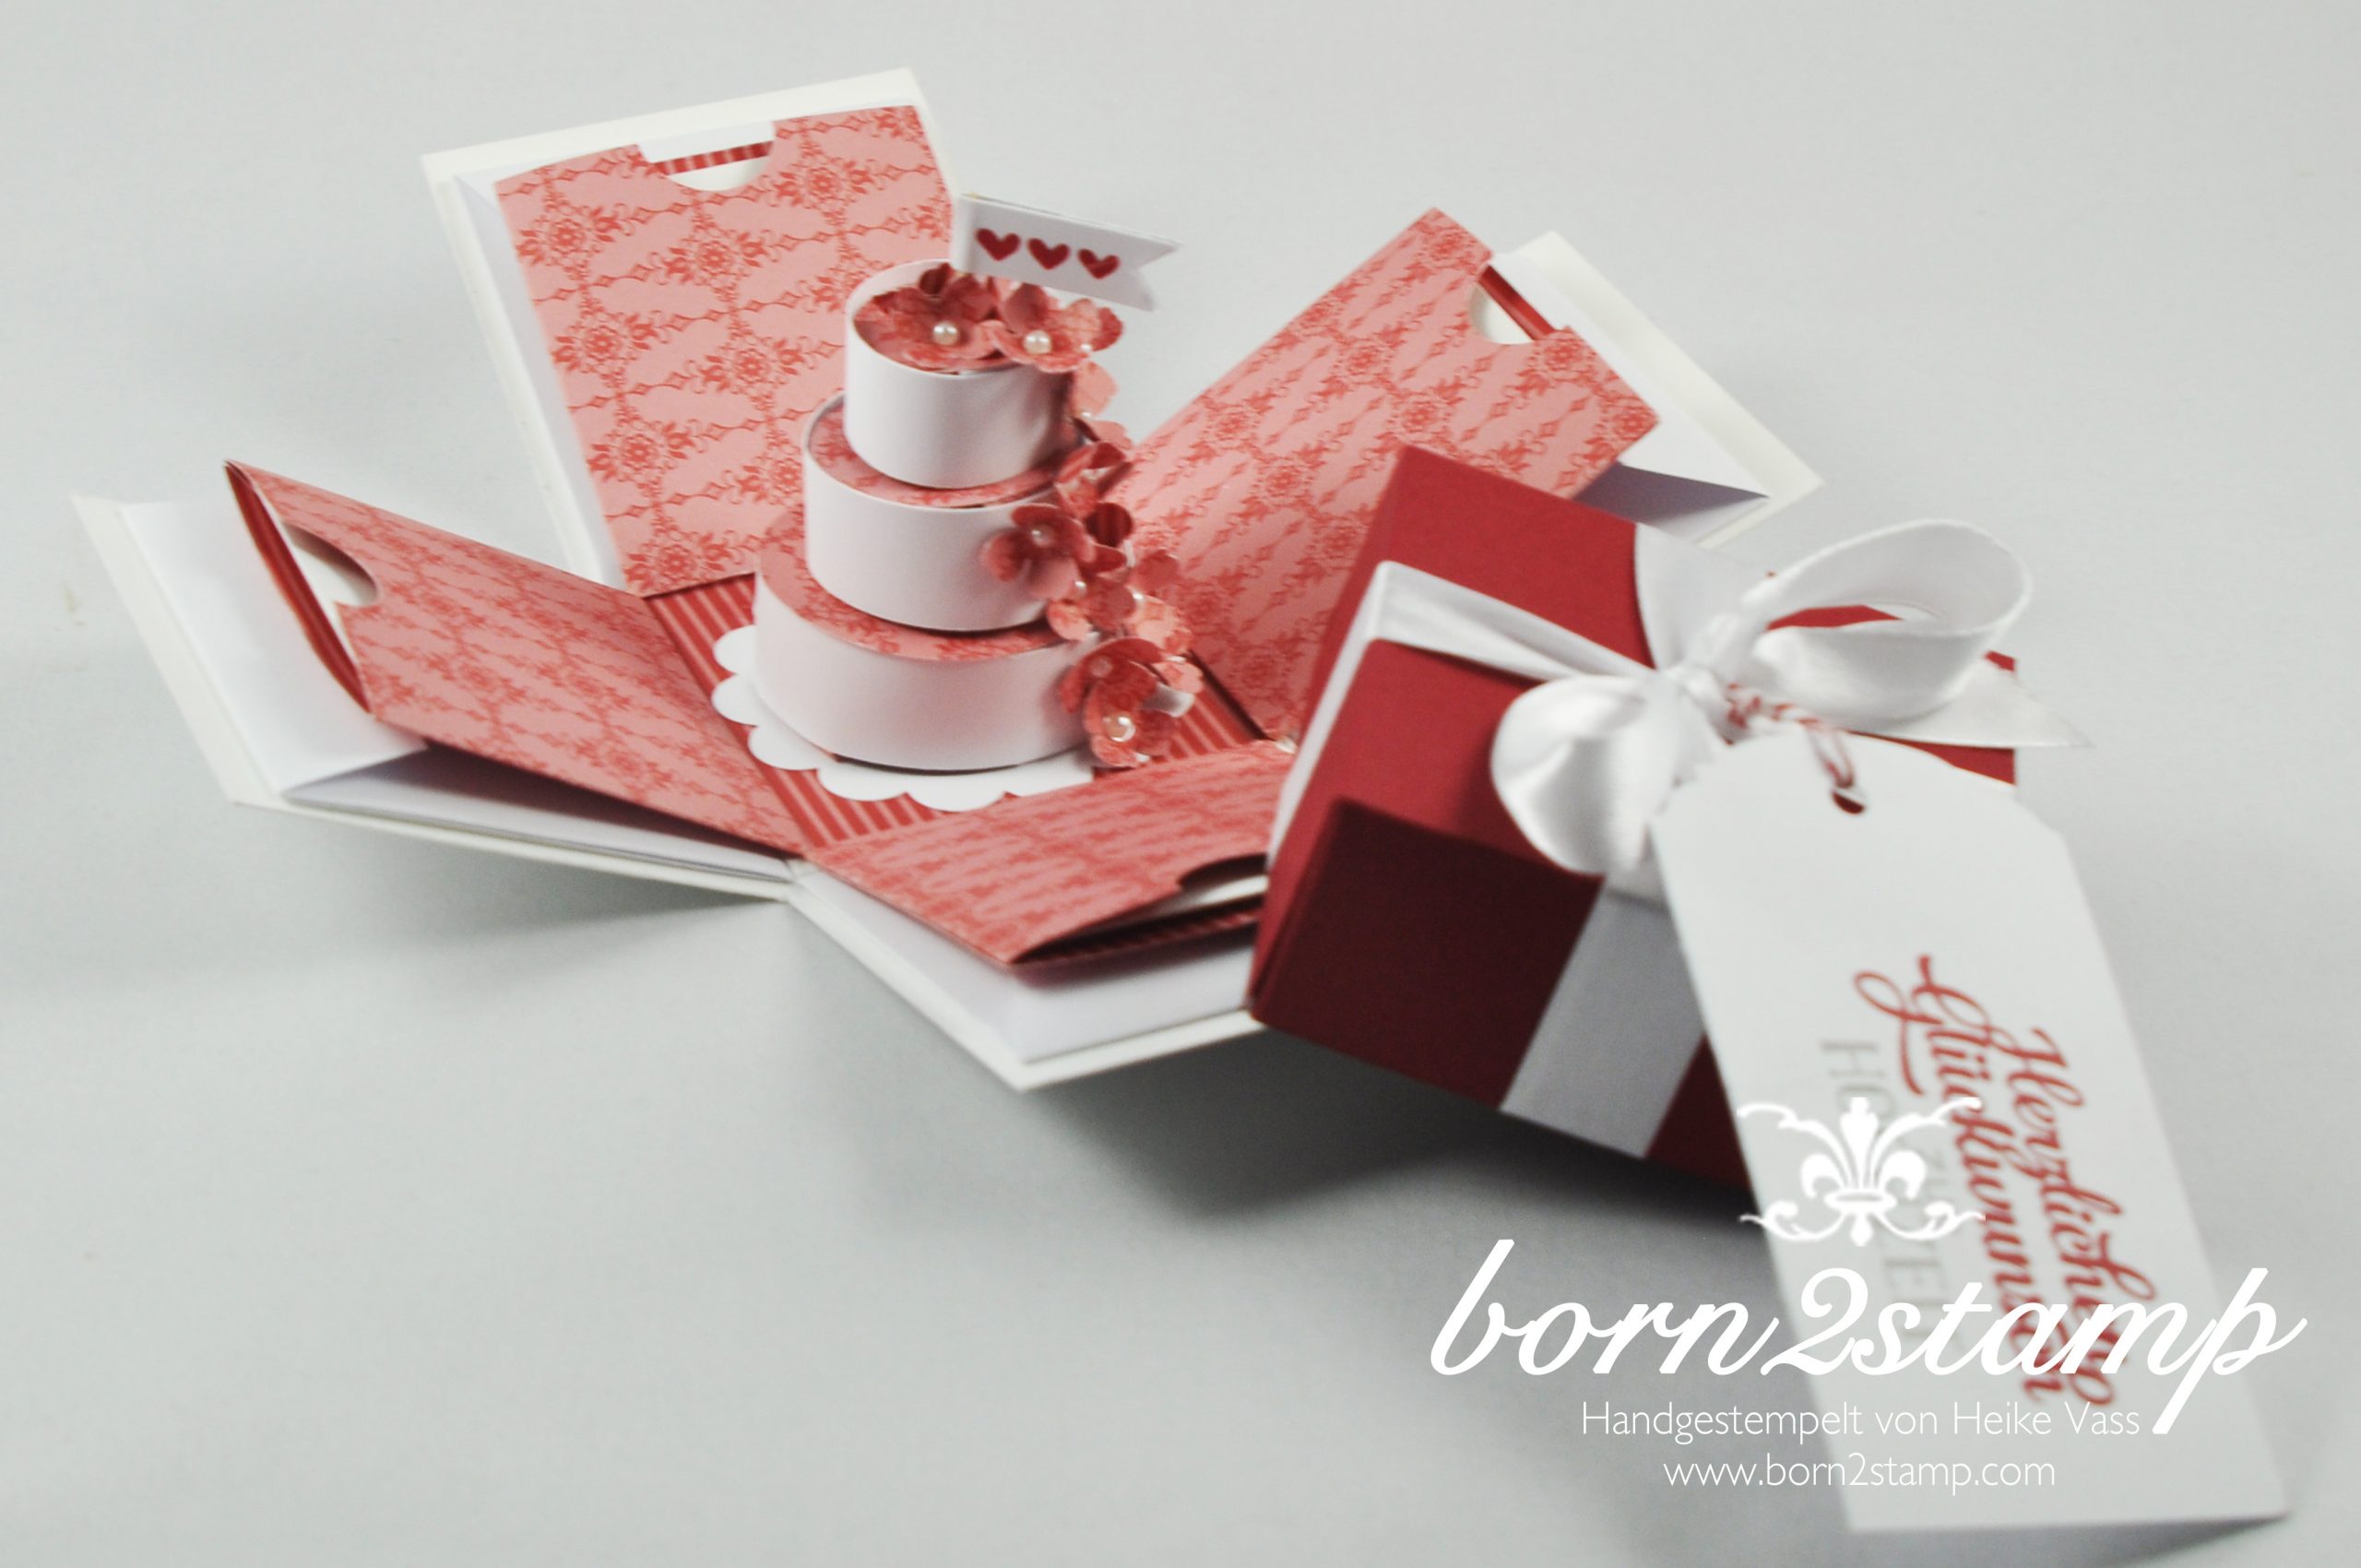 STAMPIN‘ UP! born2stamp Explosionsbox – Grusselemente 2